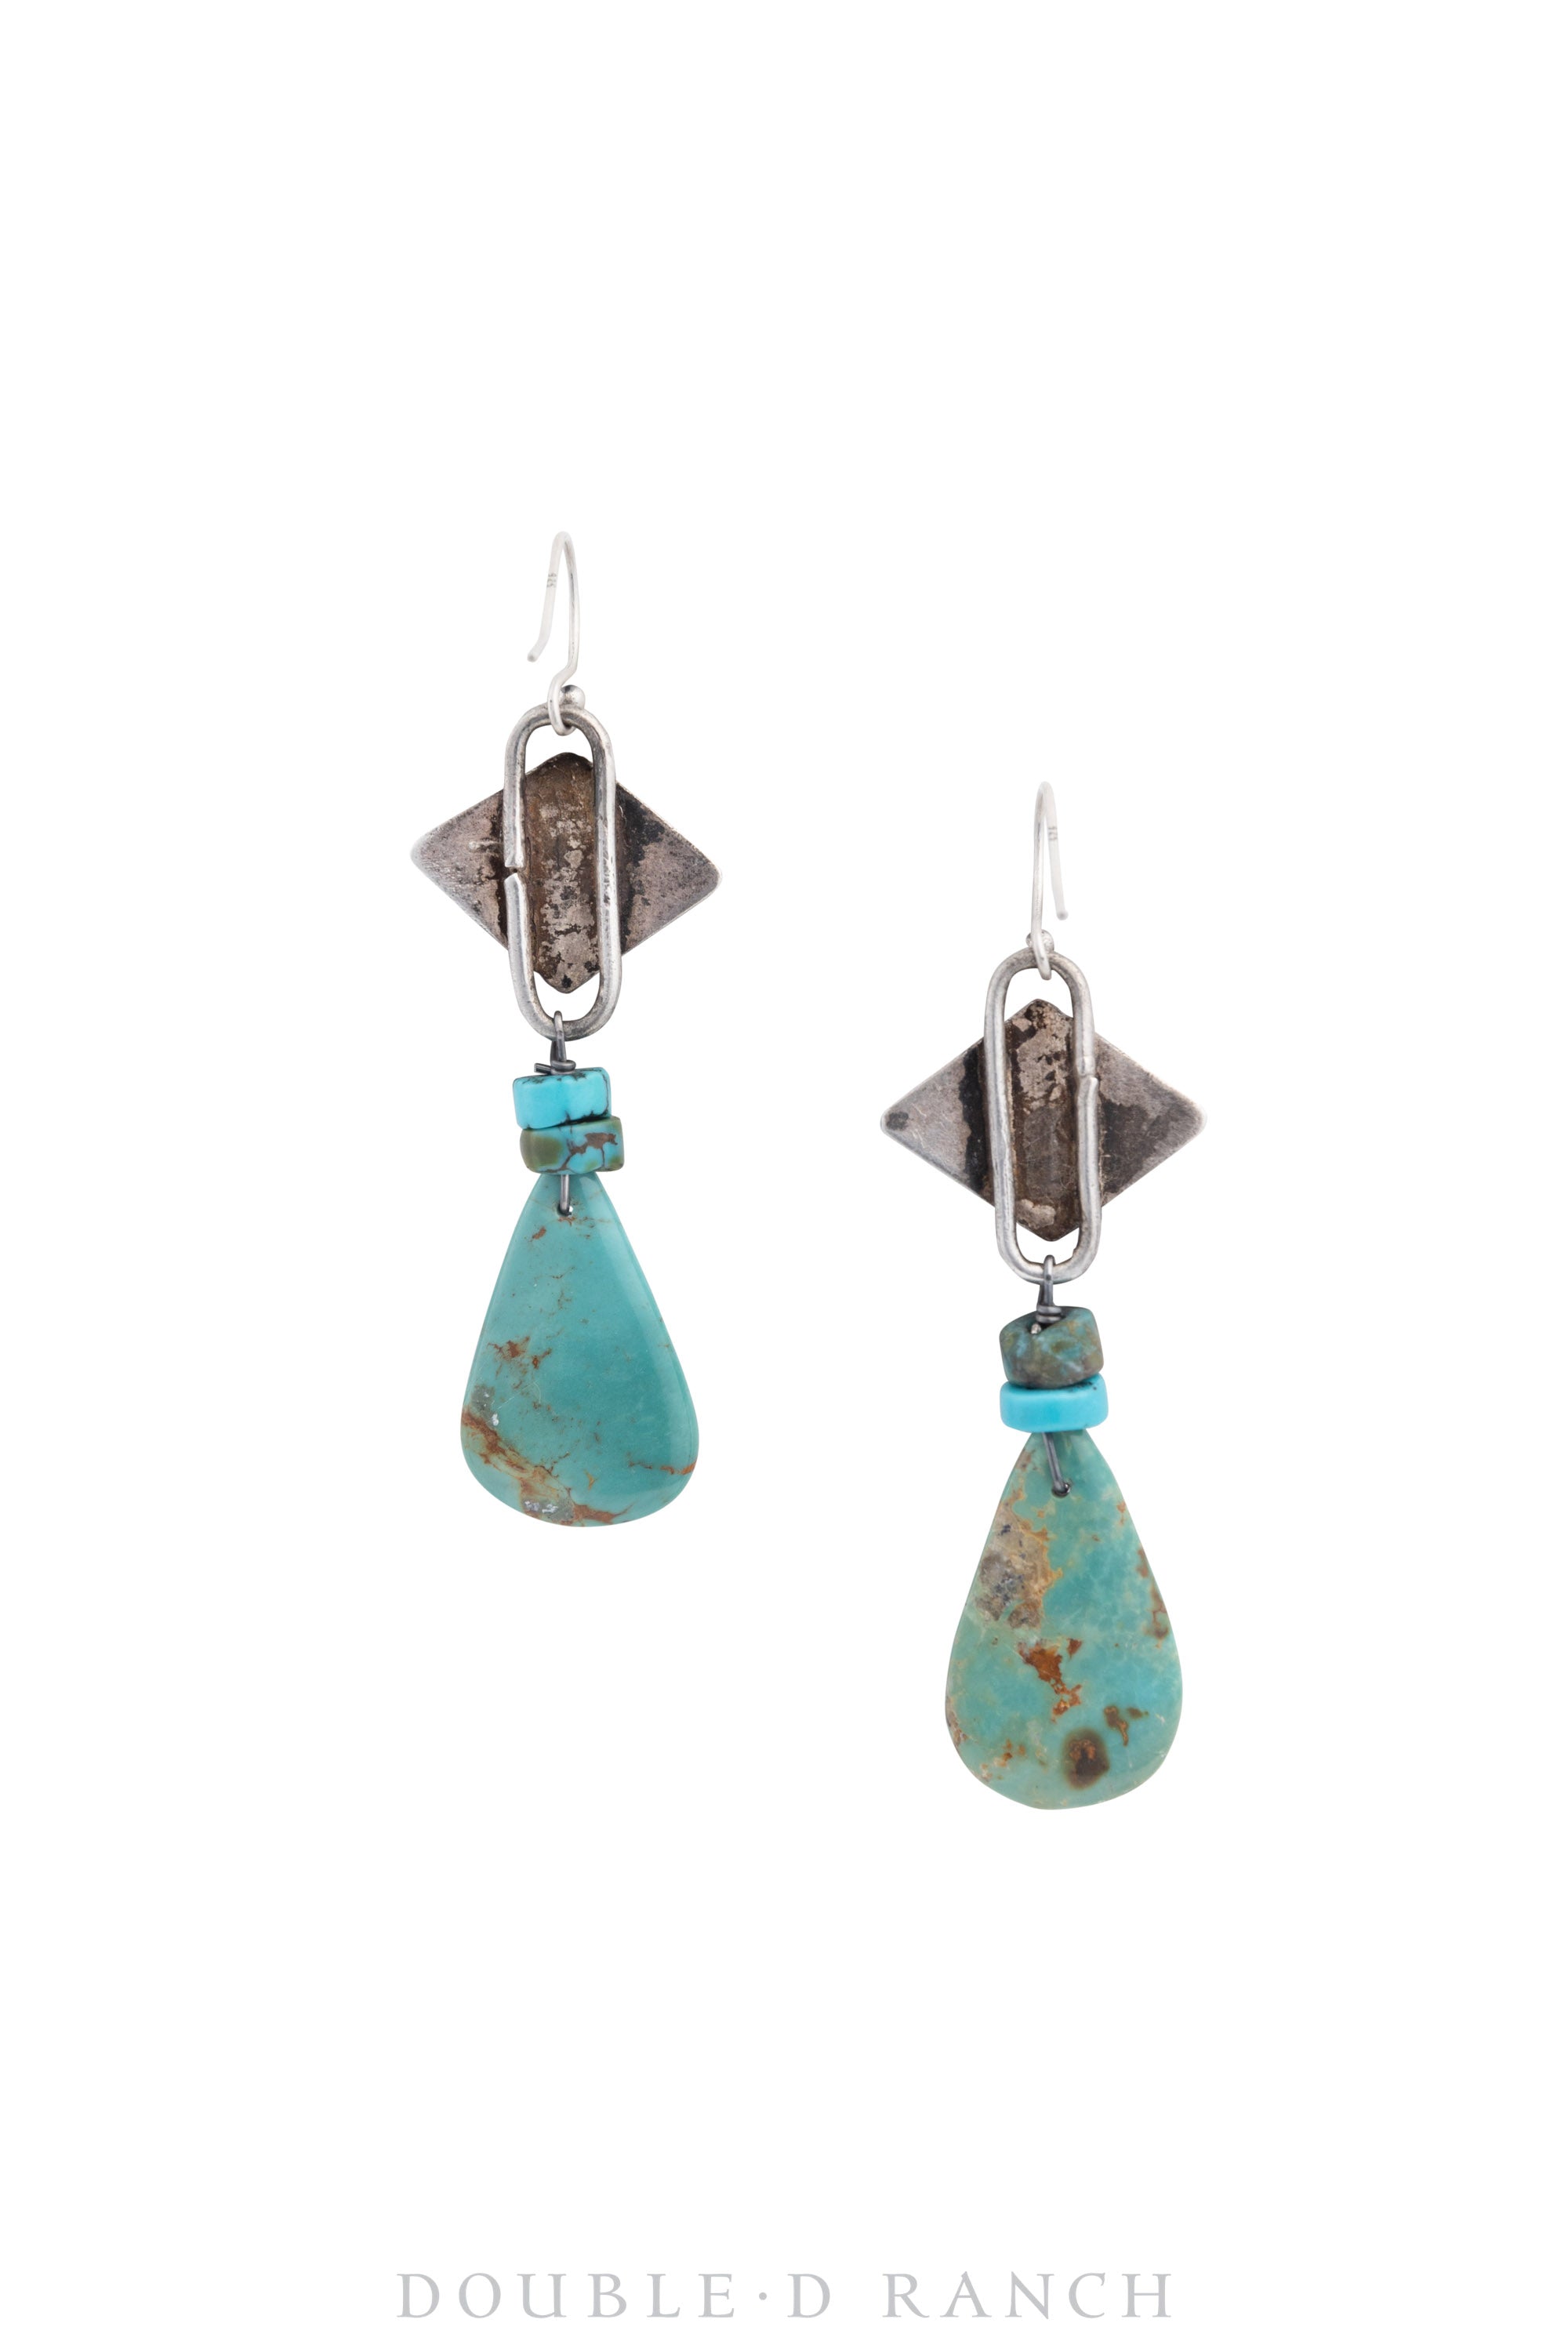 Earrings, Repurposed, Concho, Sterling Silver & Turquoise, 1475